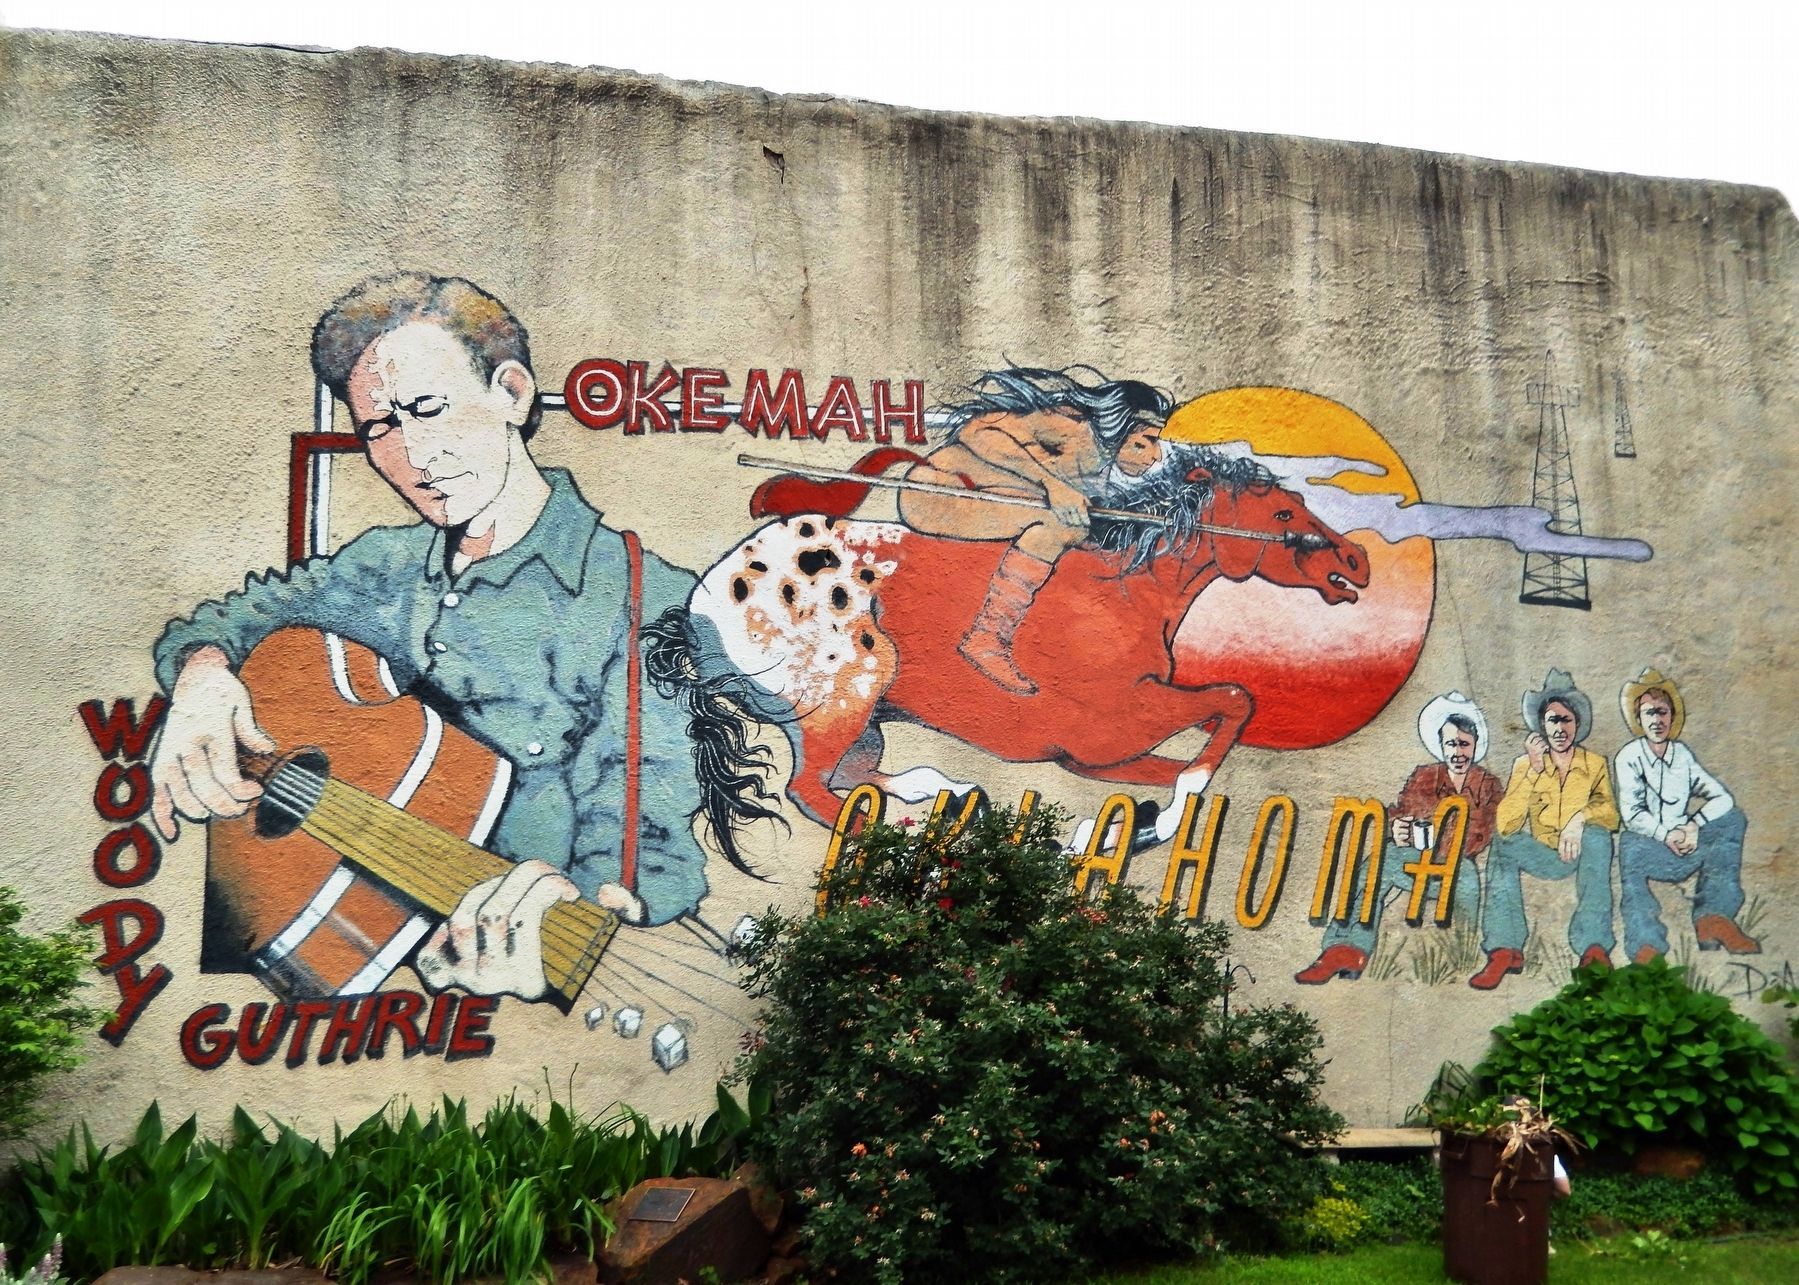 Woody Guthrie Mural (<i>located near marker</i>) image. Click for full size.